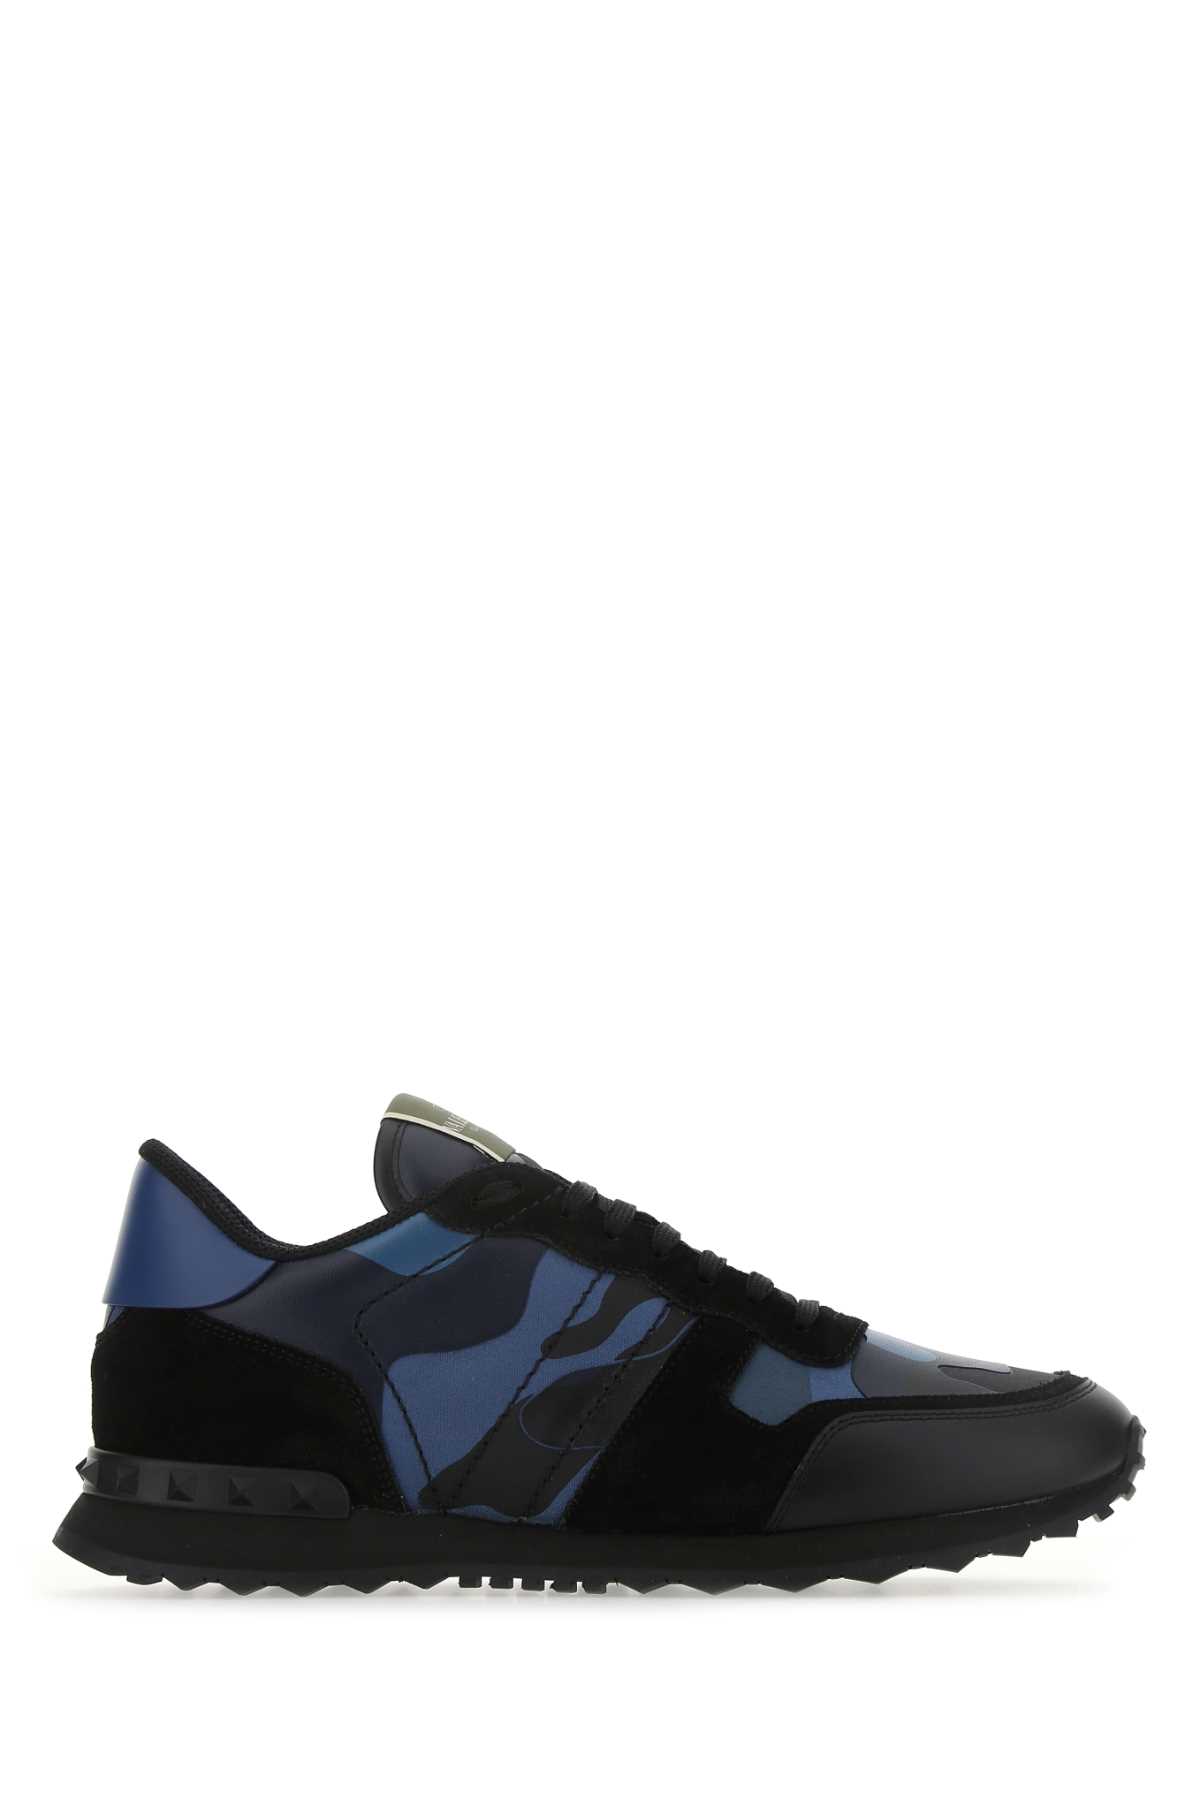 Shop Valentino Multicolor Fabric And Nappa Leather Rockrunner Camouflage Sneakers In Bluettemarineneroneronewbaltiquene